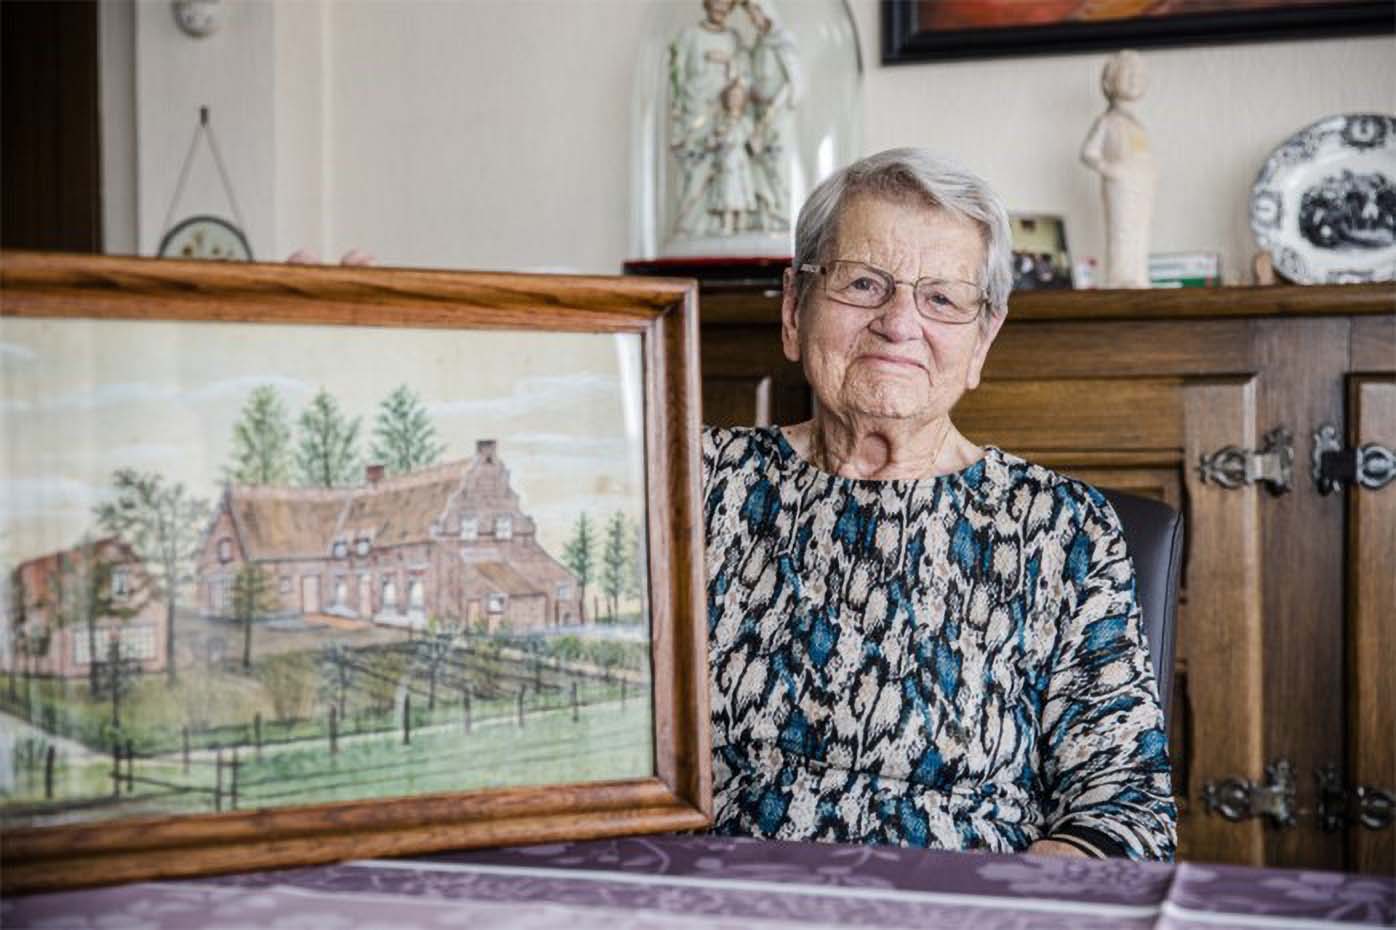 Bie Verlinden (93) next to a painting of the Brukel farmhouse that is featured in the game.